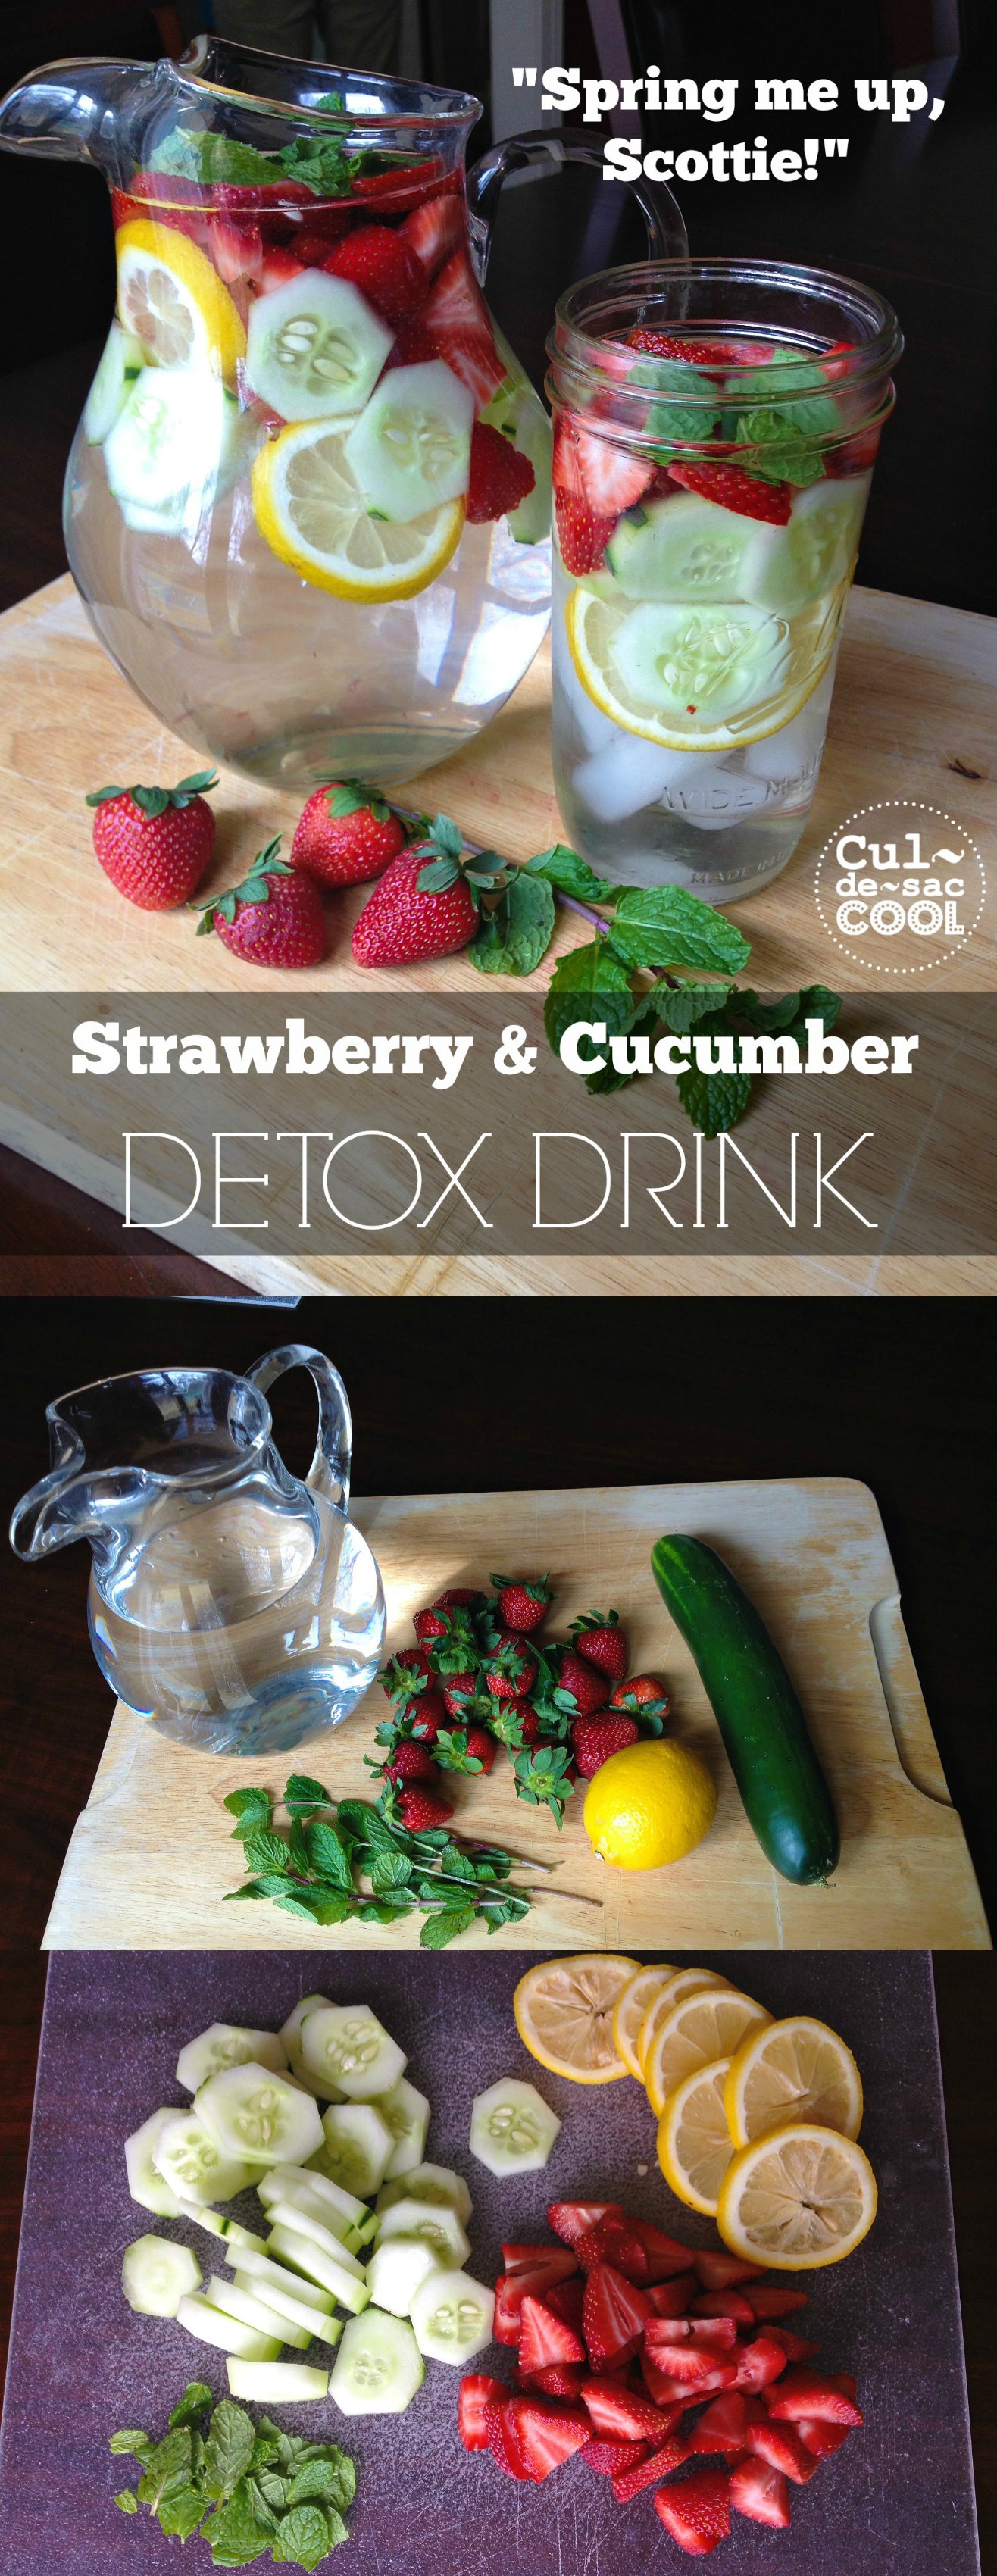 Strawberry and Cucumber Detox Drink Collage